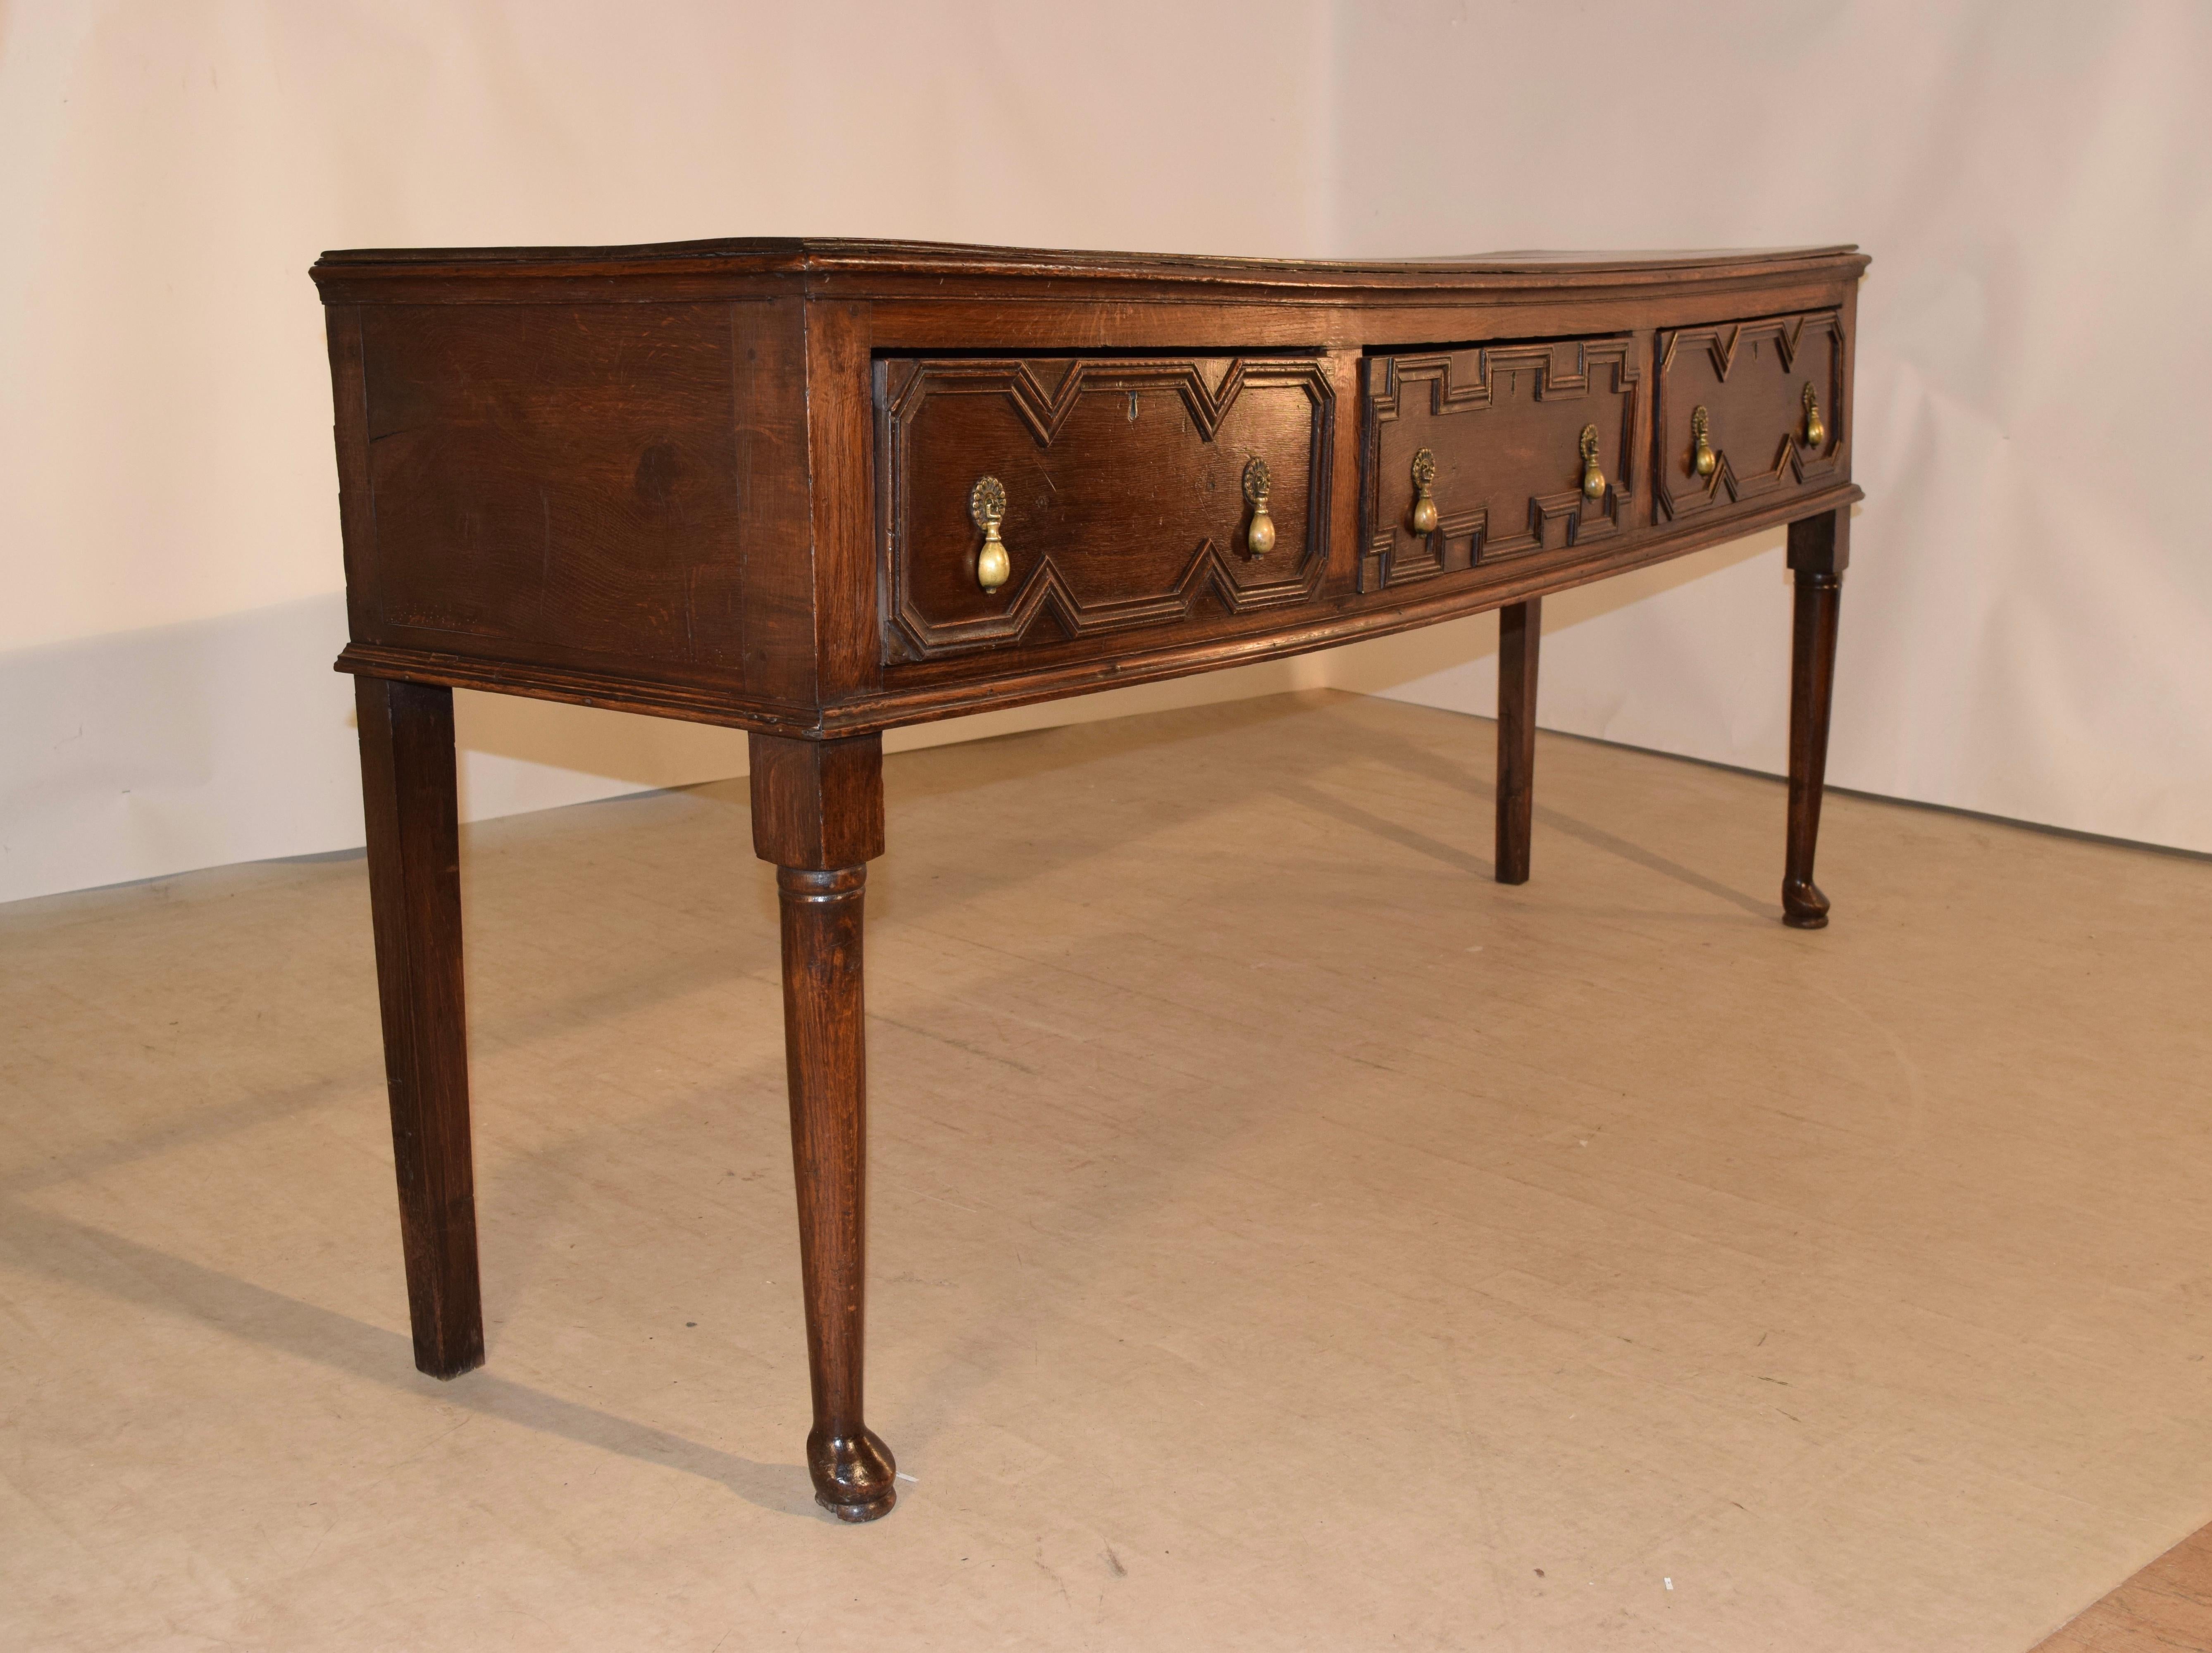 Late 17th-early 18th century English oak sideboard with a swayed top from age and use. The top has a beveled edge and follows down to simple sides and a case with three drawers in the front, all decorated with hand applied geometric moldings and